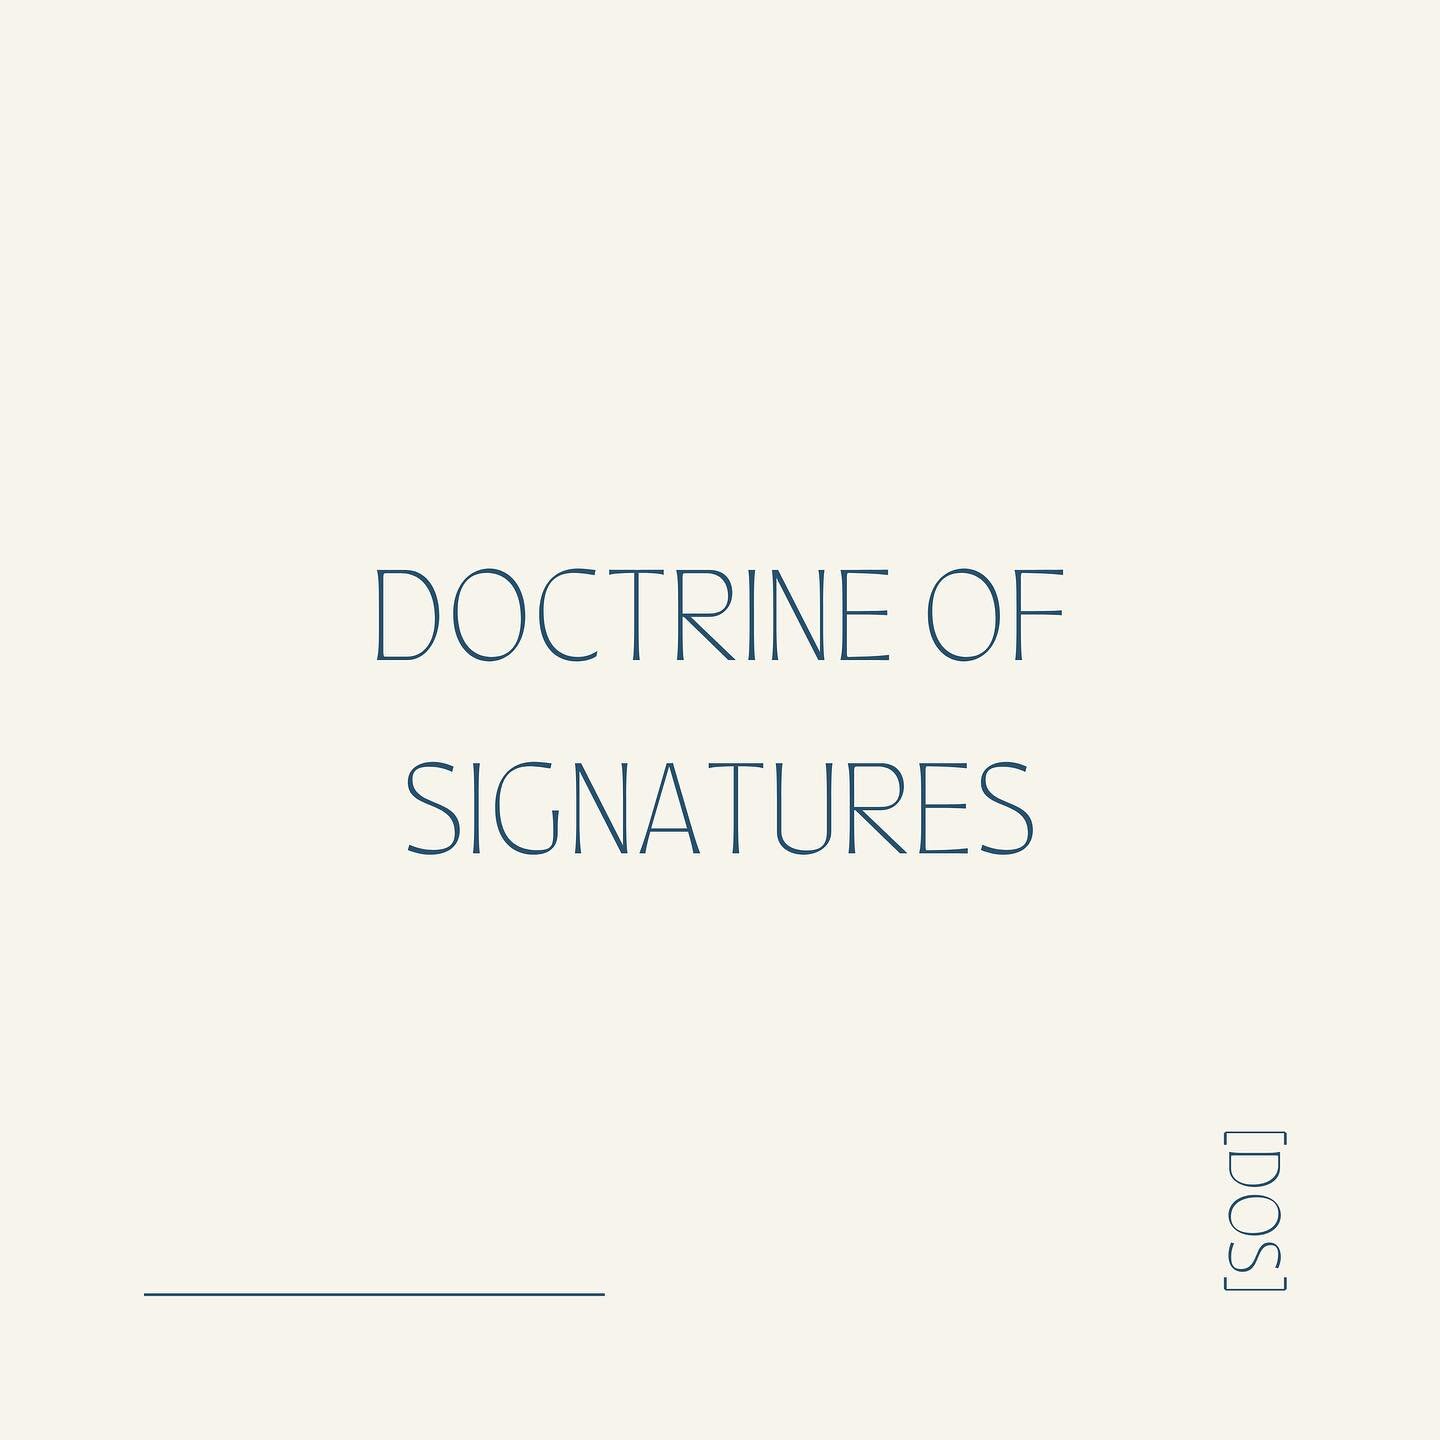 The Doctrine of Signatures is a historical theory that proposes that the physical characteristics of a plant (colour, shape and texture) can provide clues about its medicinal properties and therapeutic benefits.

For example, yellow or gold-coloured 